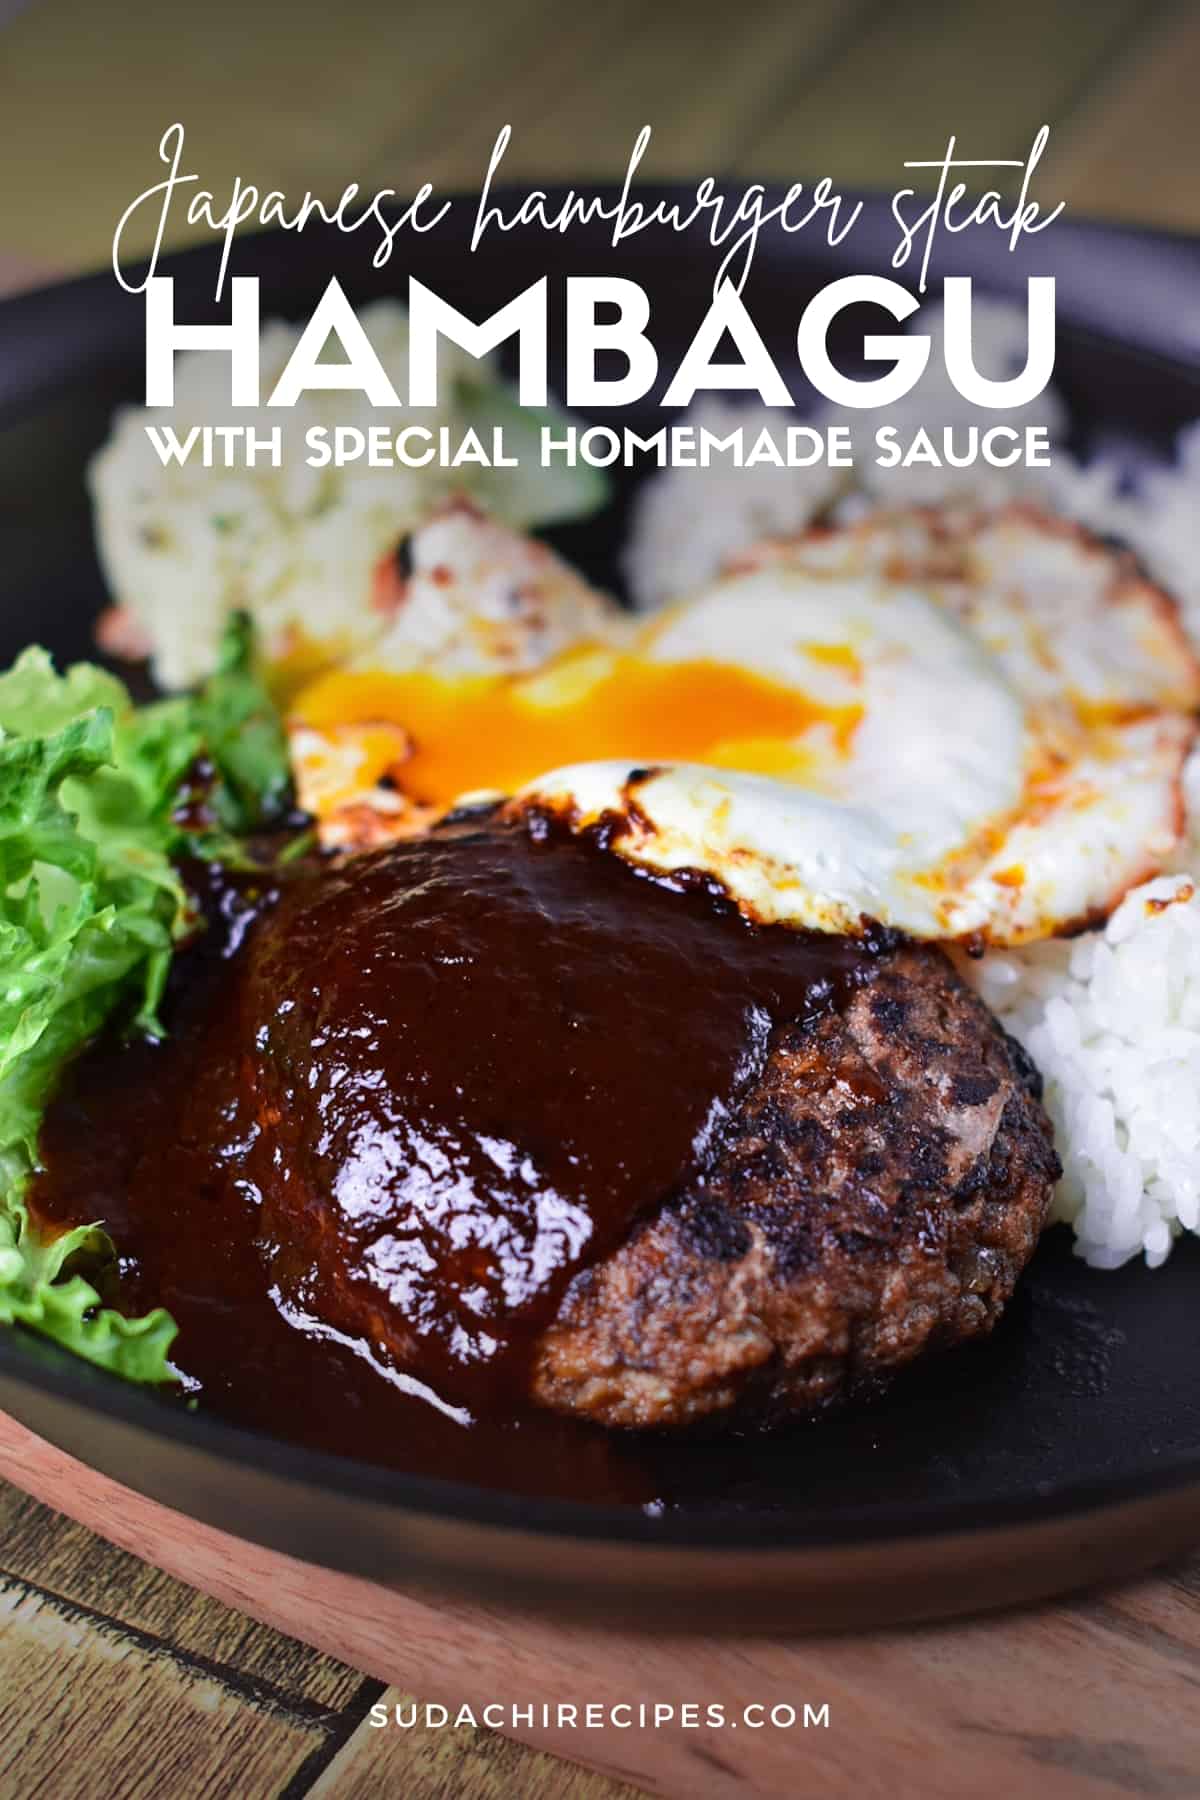 Japanese hambagu steak on a black plate with rice, salad and a fried egg